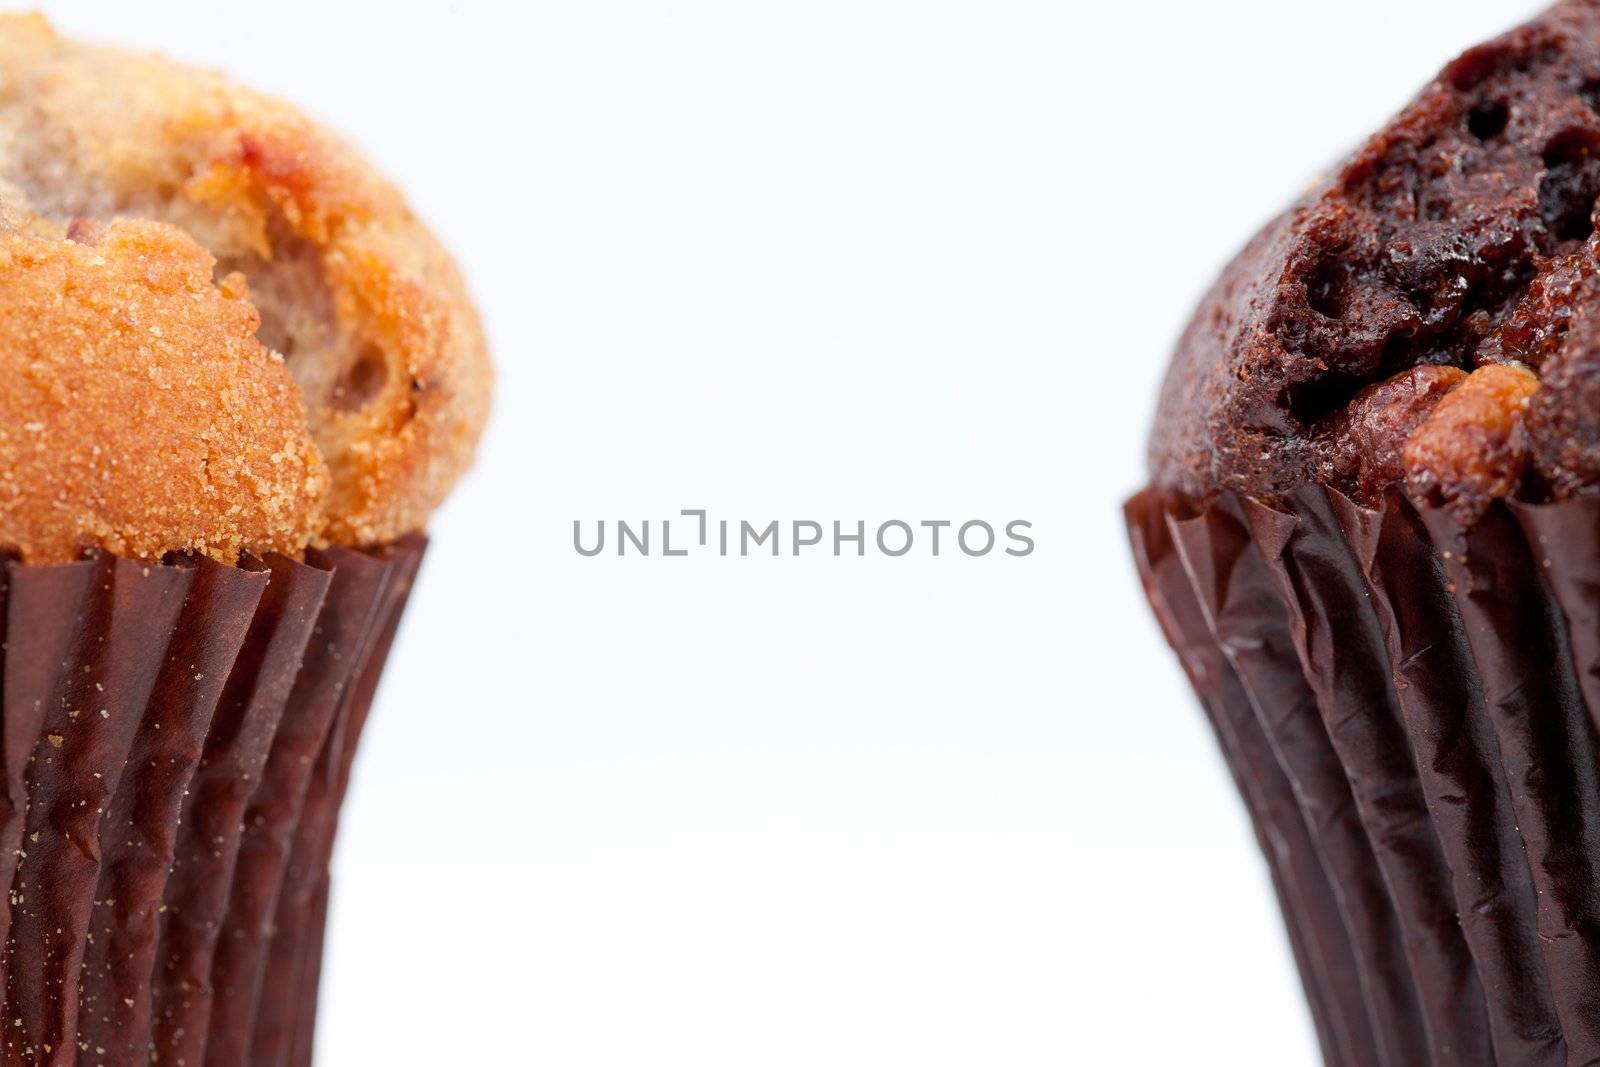 Close up of a chocolate muffin and a regular muffin against a white background